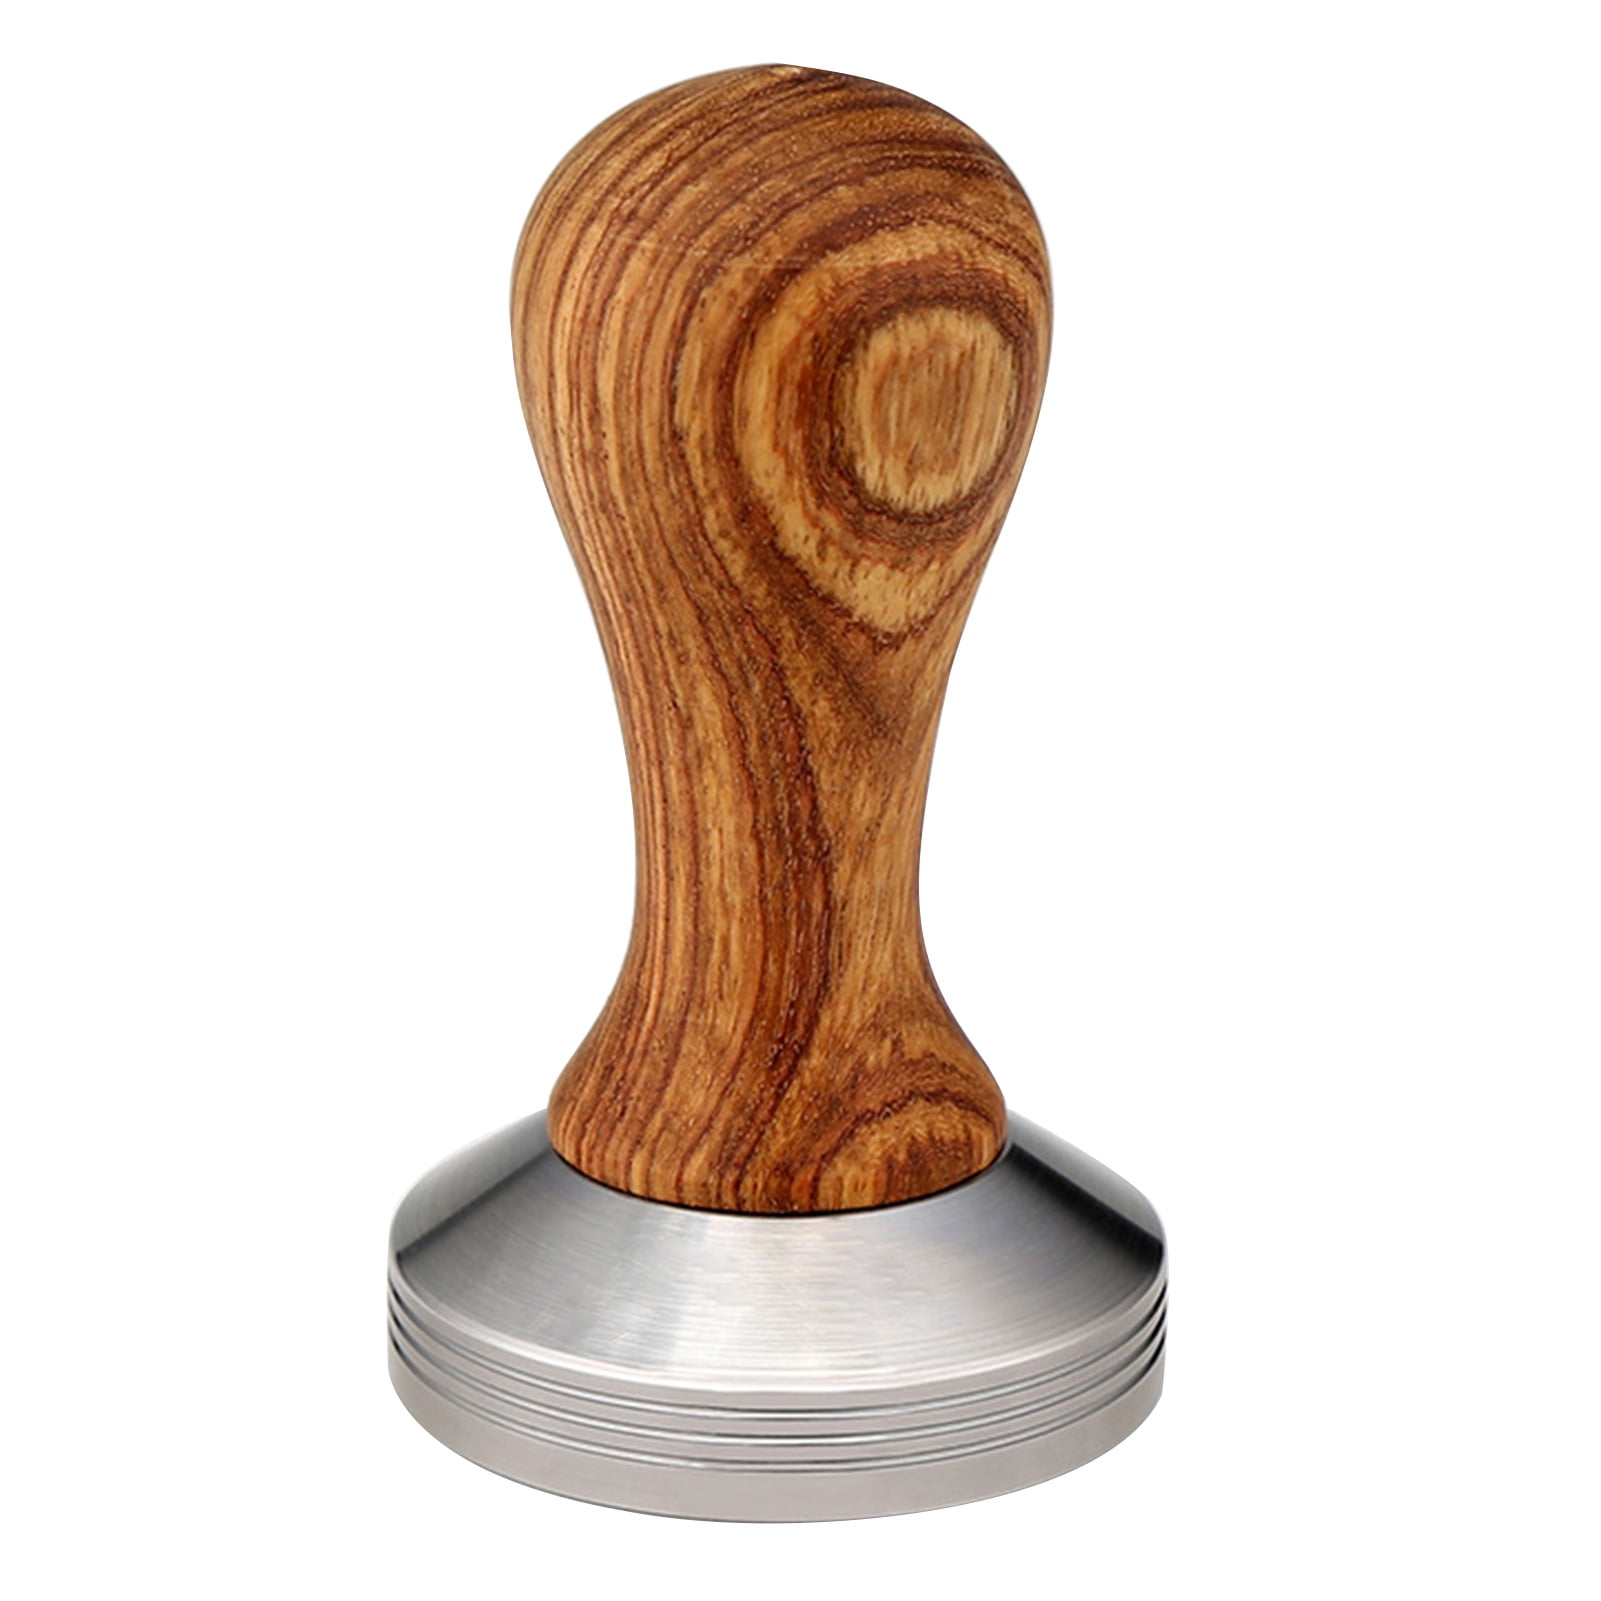 Easy to Clean Stainless Steel Base for Home Office Coffee Accessory Cafe Wood Color, 51MM Flat Bottom Wood Handle Coffee Bean Press Coffee Tamper 